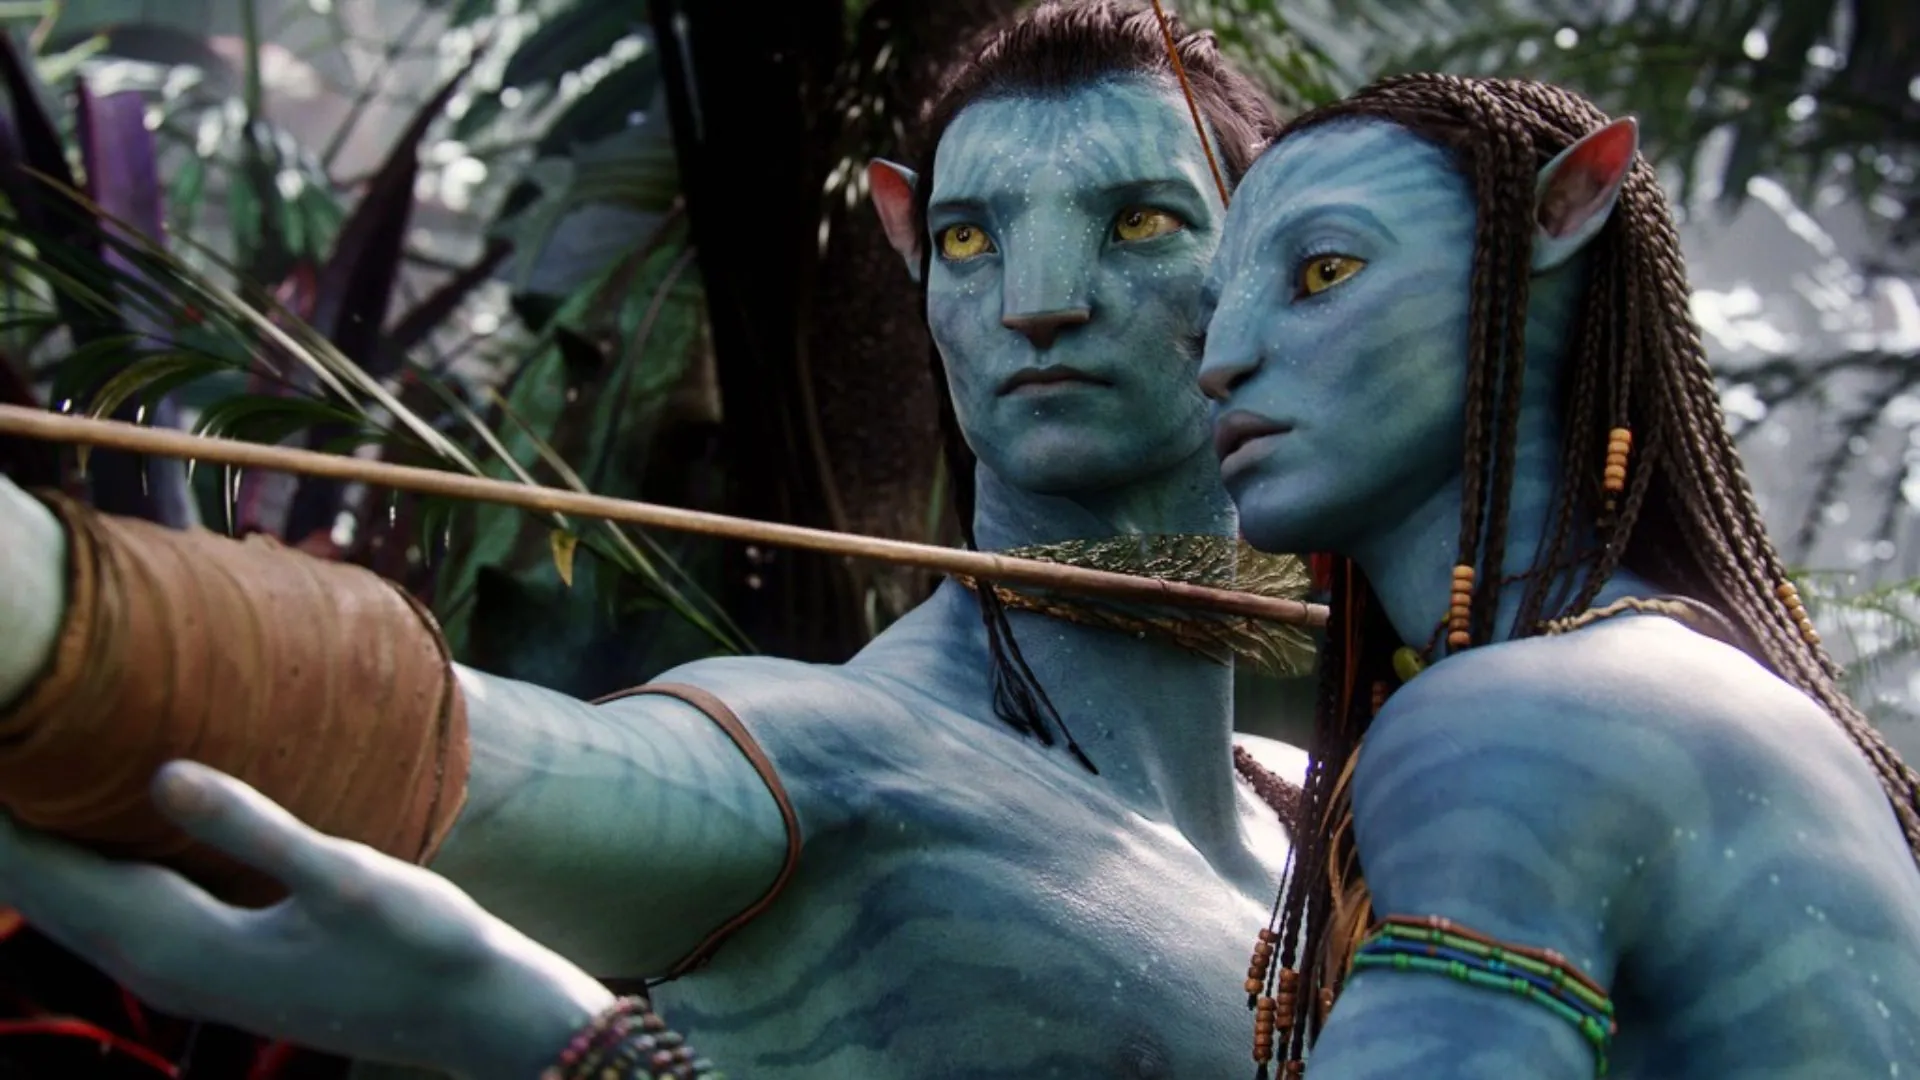 'Avatar' Re-release International Box Office Collection